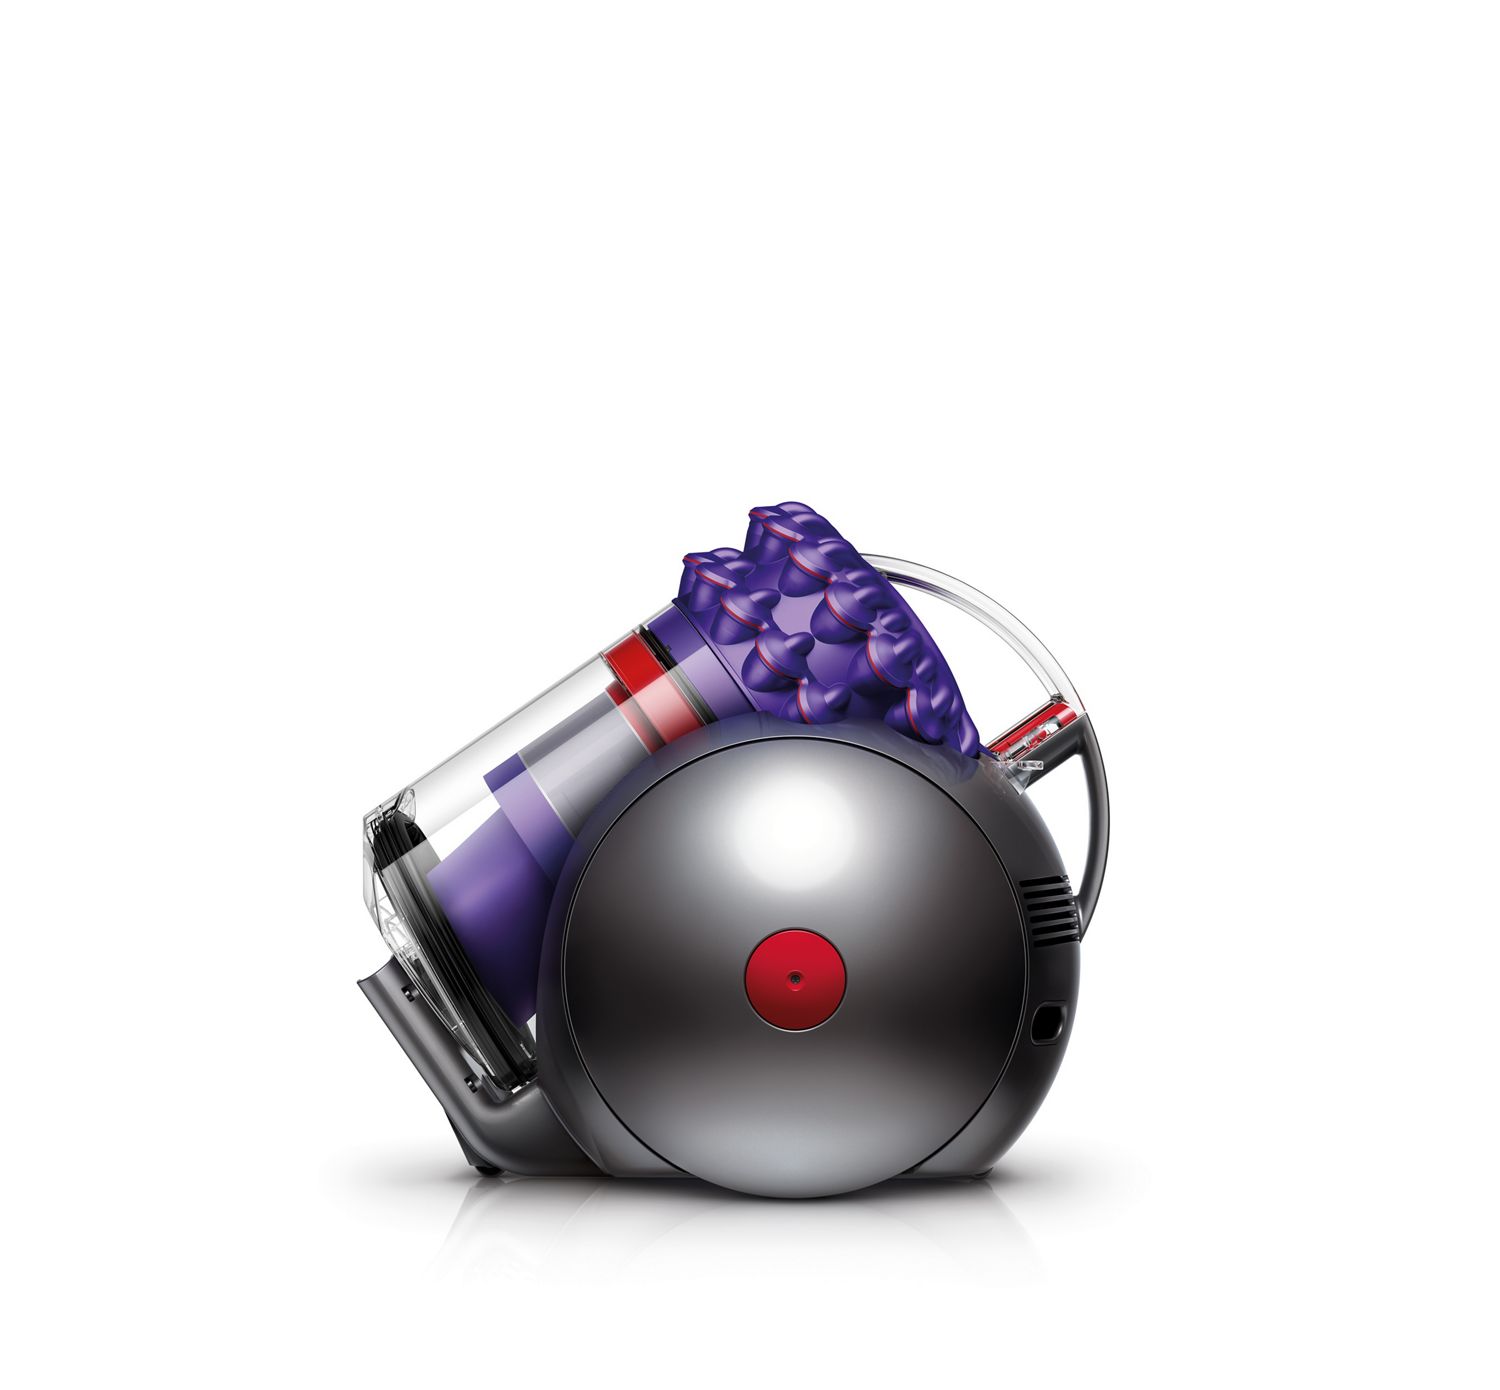 Cinetic Big Ball canister vacuums | Dyson Canada